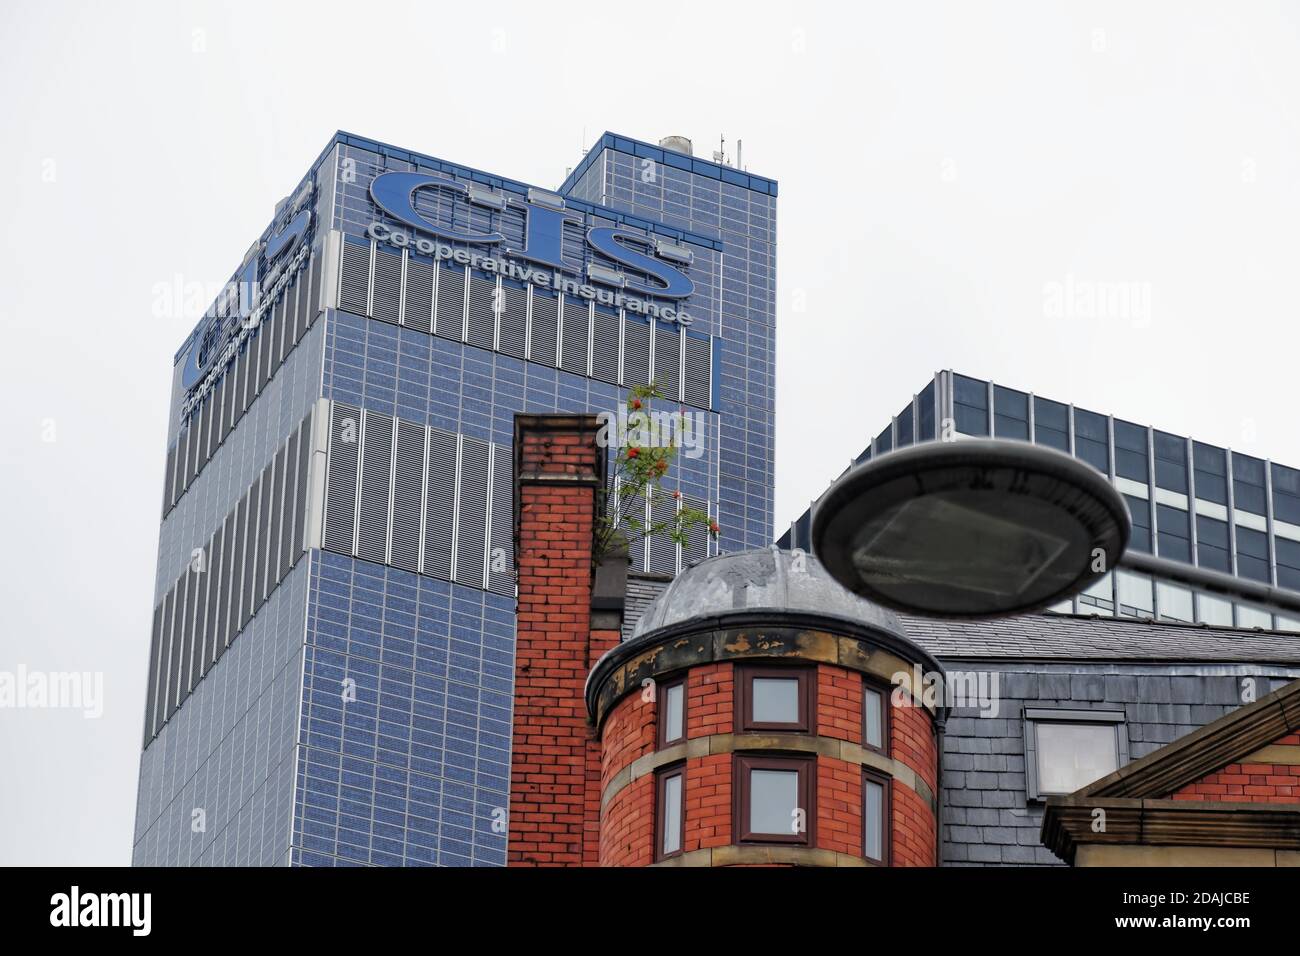 The CIS Tower is an office block skyscaper building in Manchester, UK. Presently a university building. The service tower (left) is solar panel clad. Stock Photo